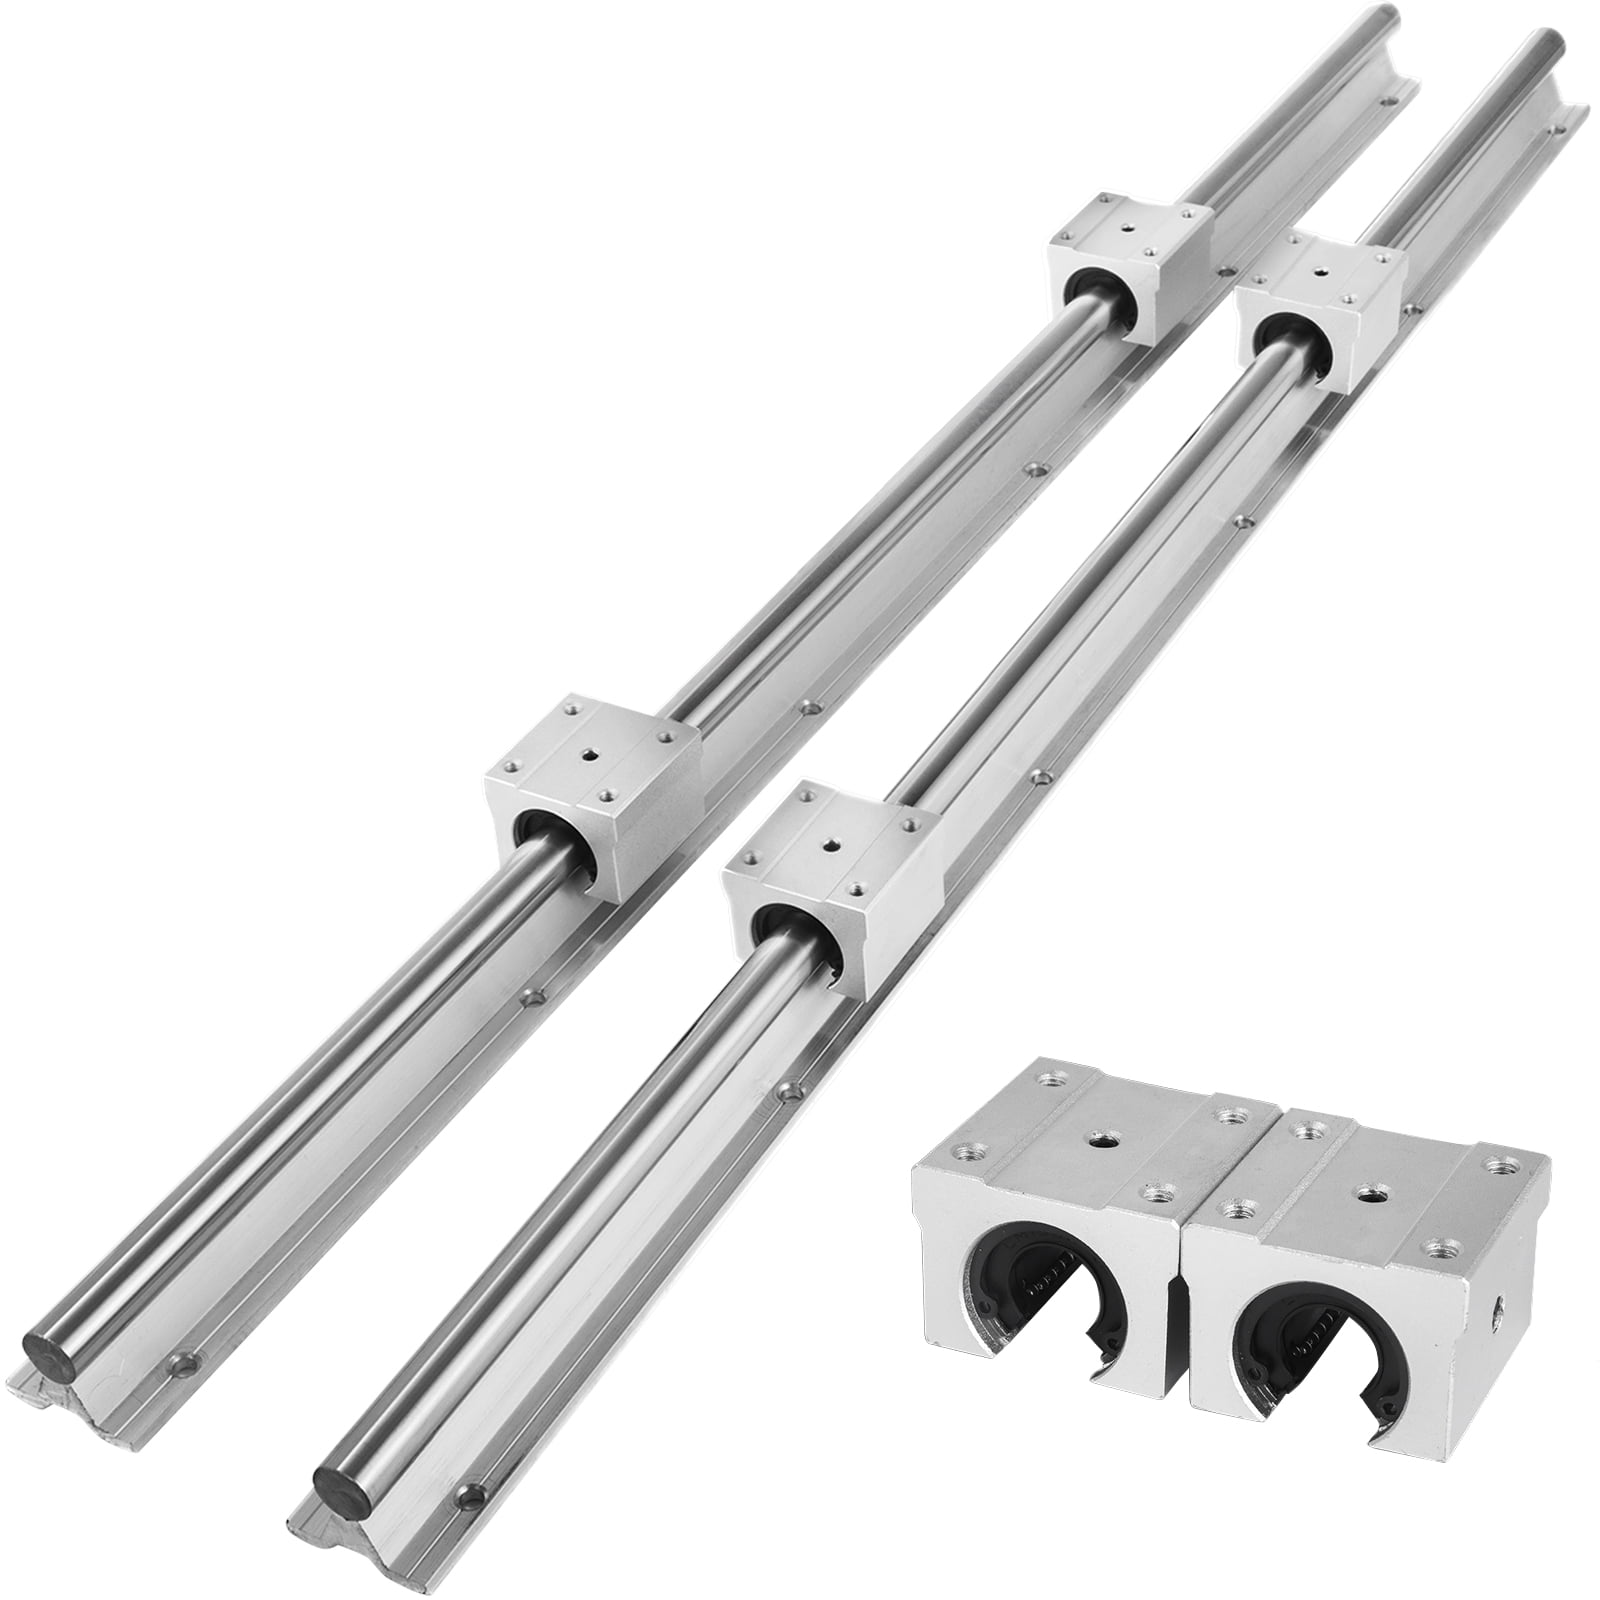 for DIY CNC Routers Lathes Mills SenTECH Linear Rail/Guide Rod HSR15 Length Approx.1800mm/70.87inch Linear Guideway Rail Square Type Carriage Bearing Block HSR15CR x 2 Pcs 